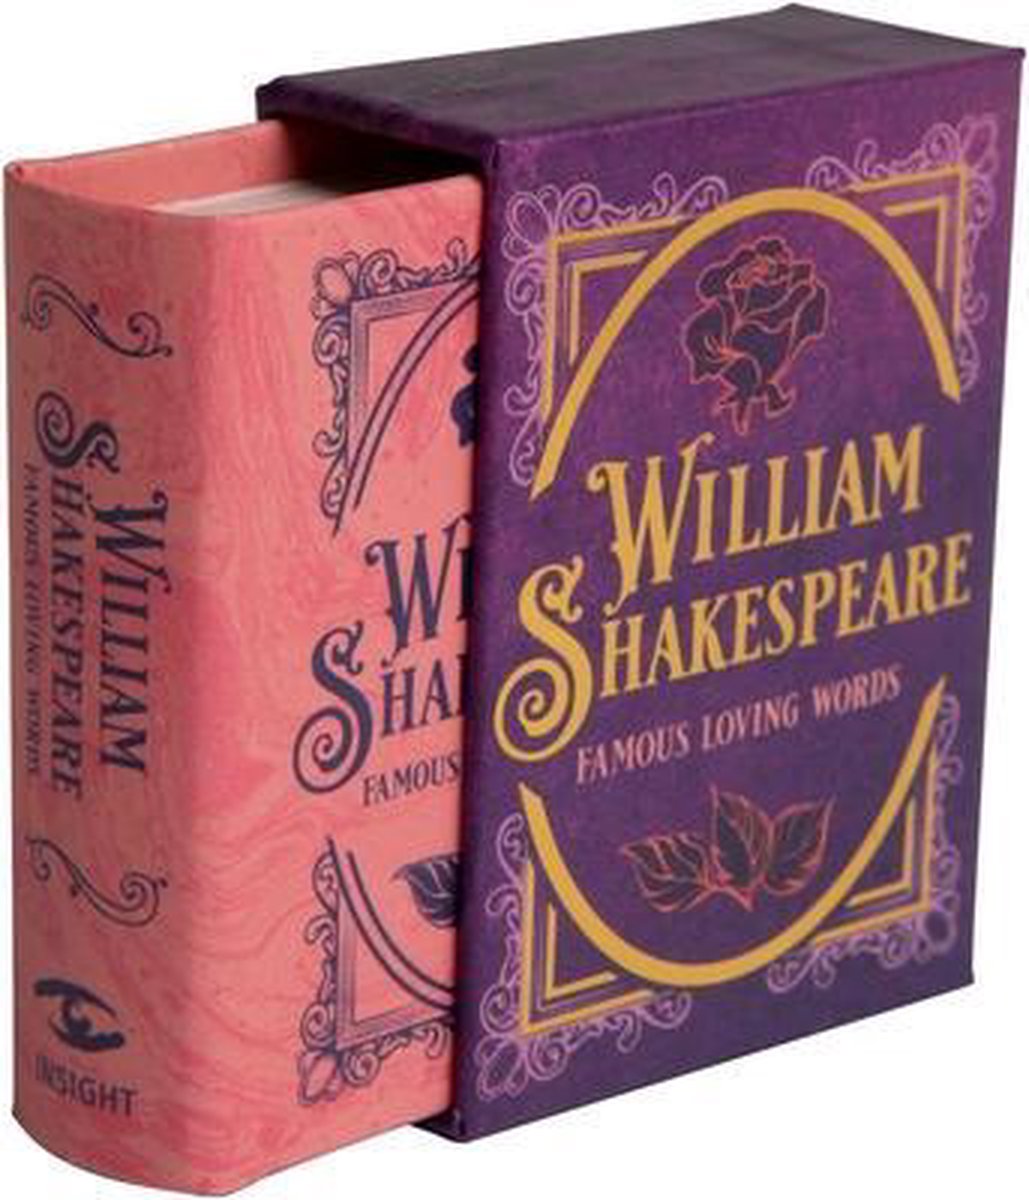 William Shakespeare: Famous Loving Words (Tiny Book) by Darcy Reed